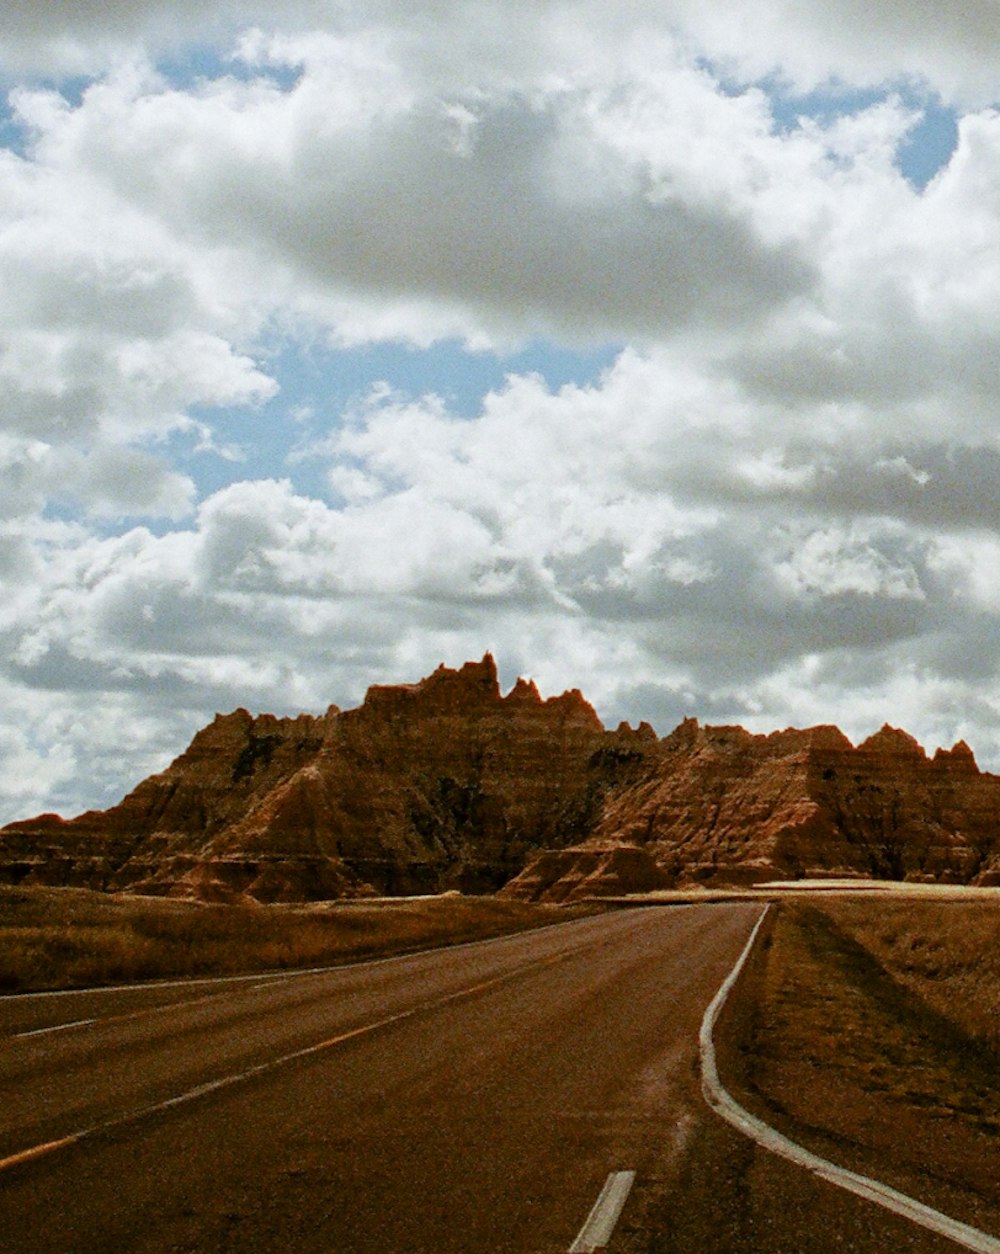 A photo of a desert road under clouds leading to a mountain